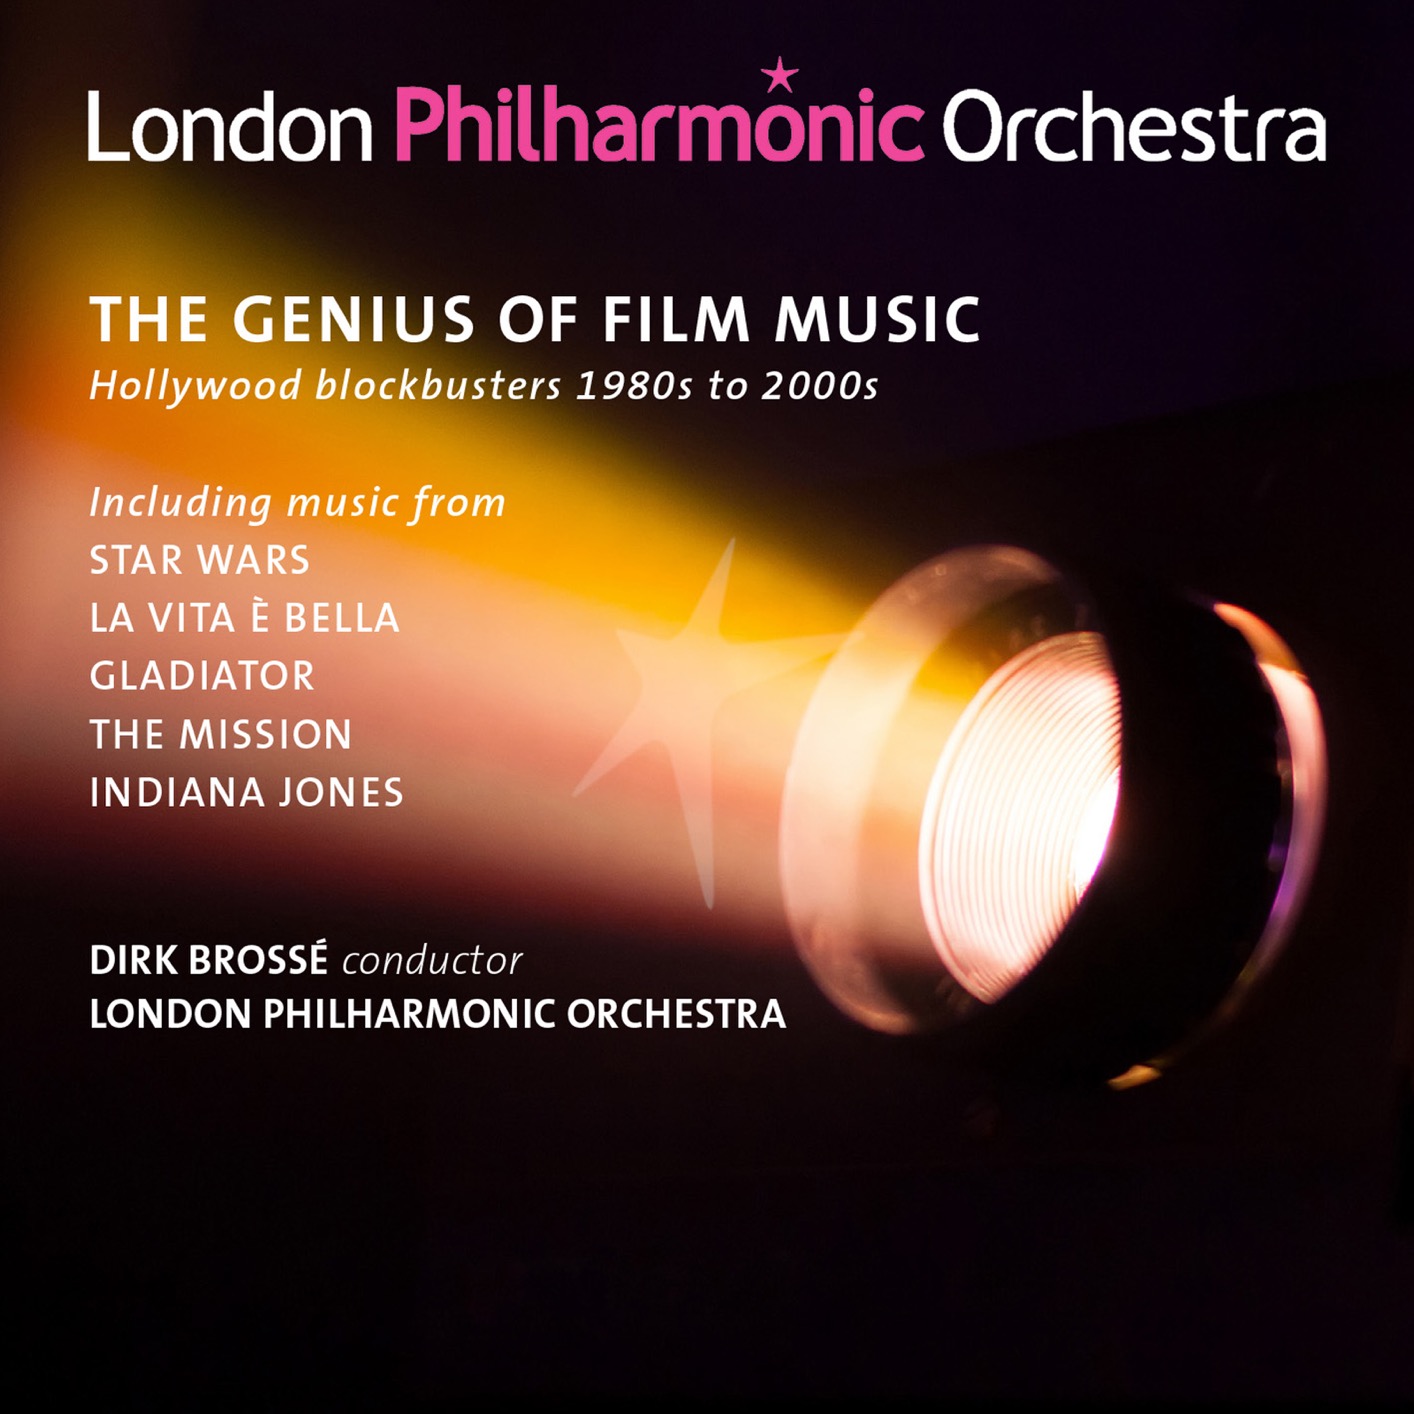 London Philharmonic Orchestra & Dirk Brosse - The Genius of Film Music: Hollywood Blockbusters 1980s to 2000s (2018) [FLAC 24bit/96kHz]